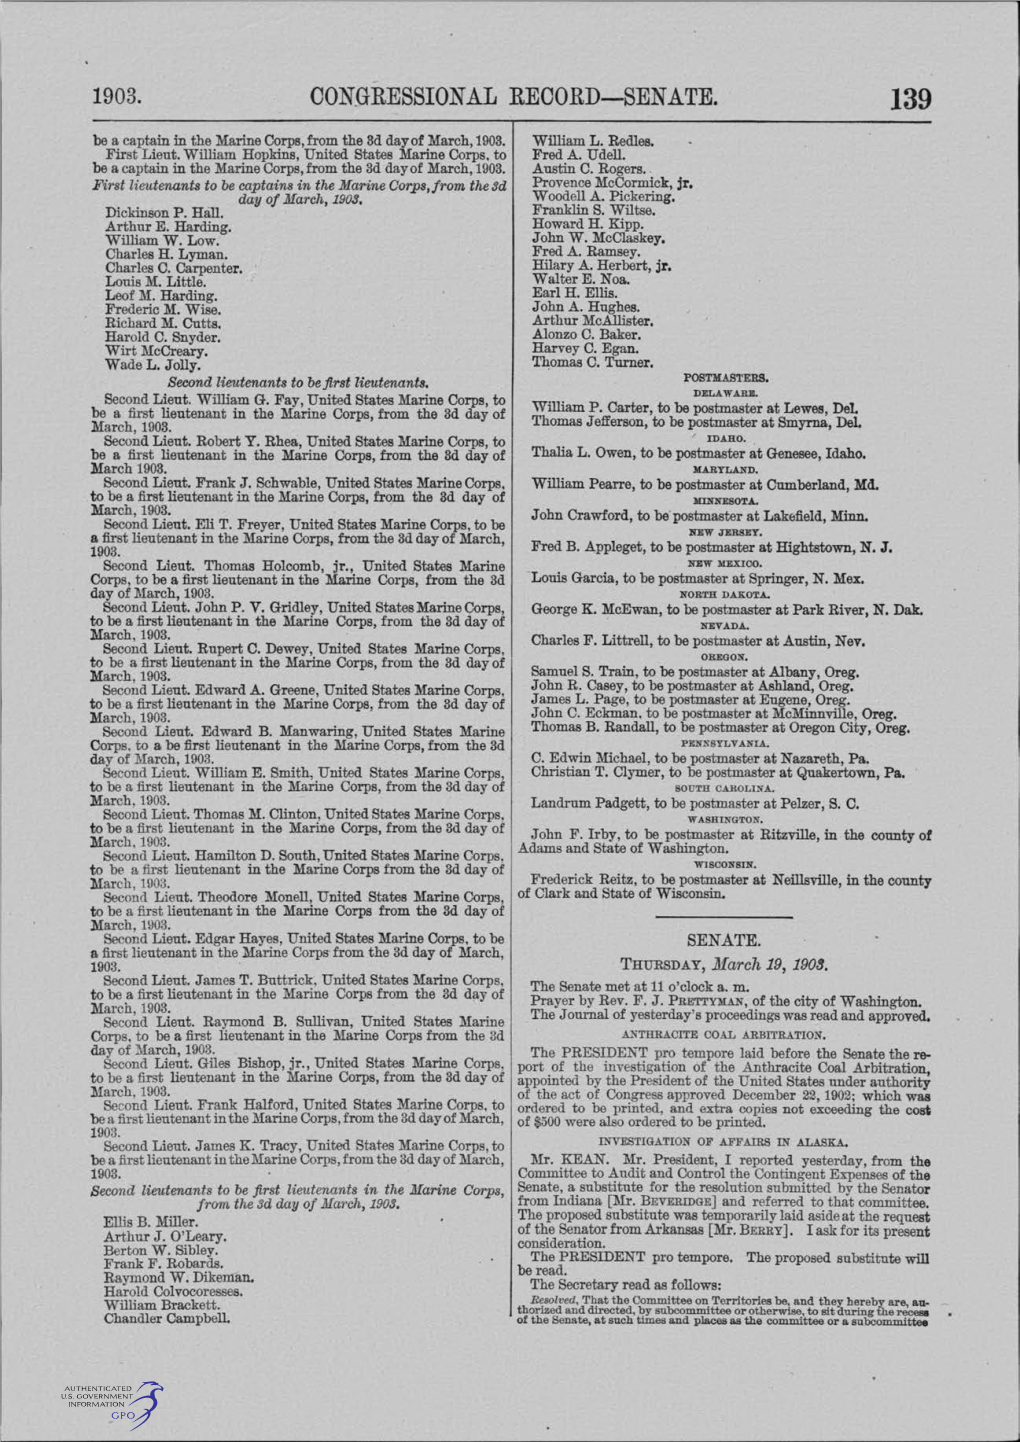 CON.GRESSION.A.L RECORD-SENATE. 139 Be a Captain in the Marine Corps, from the 3D Day of March, 1903